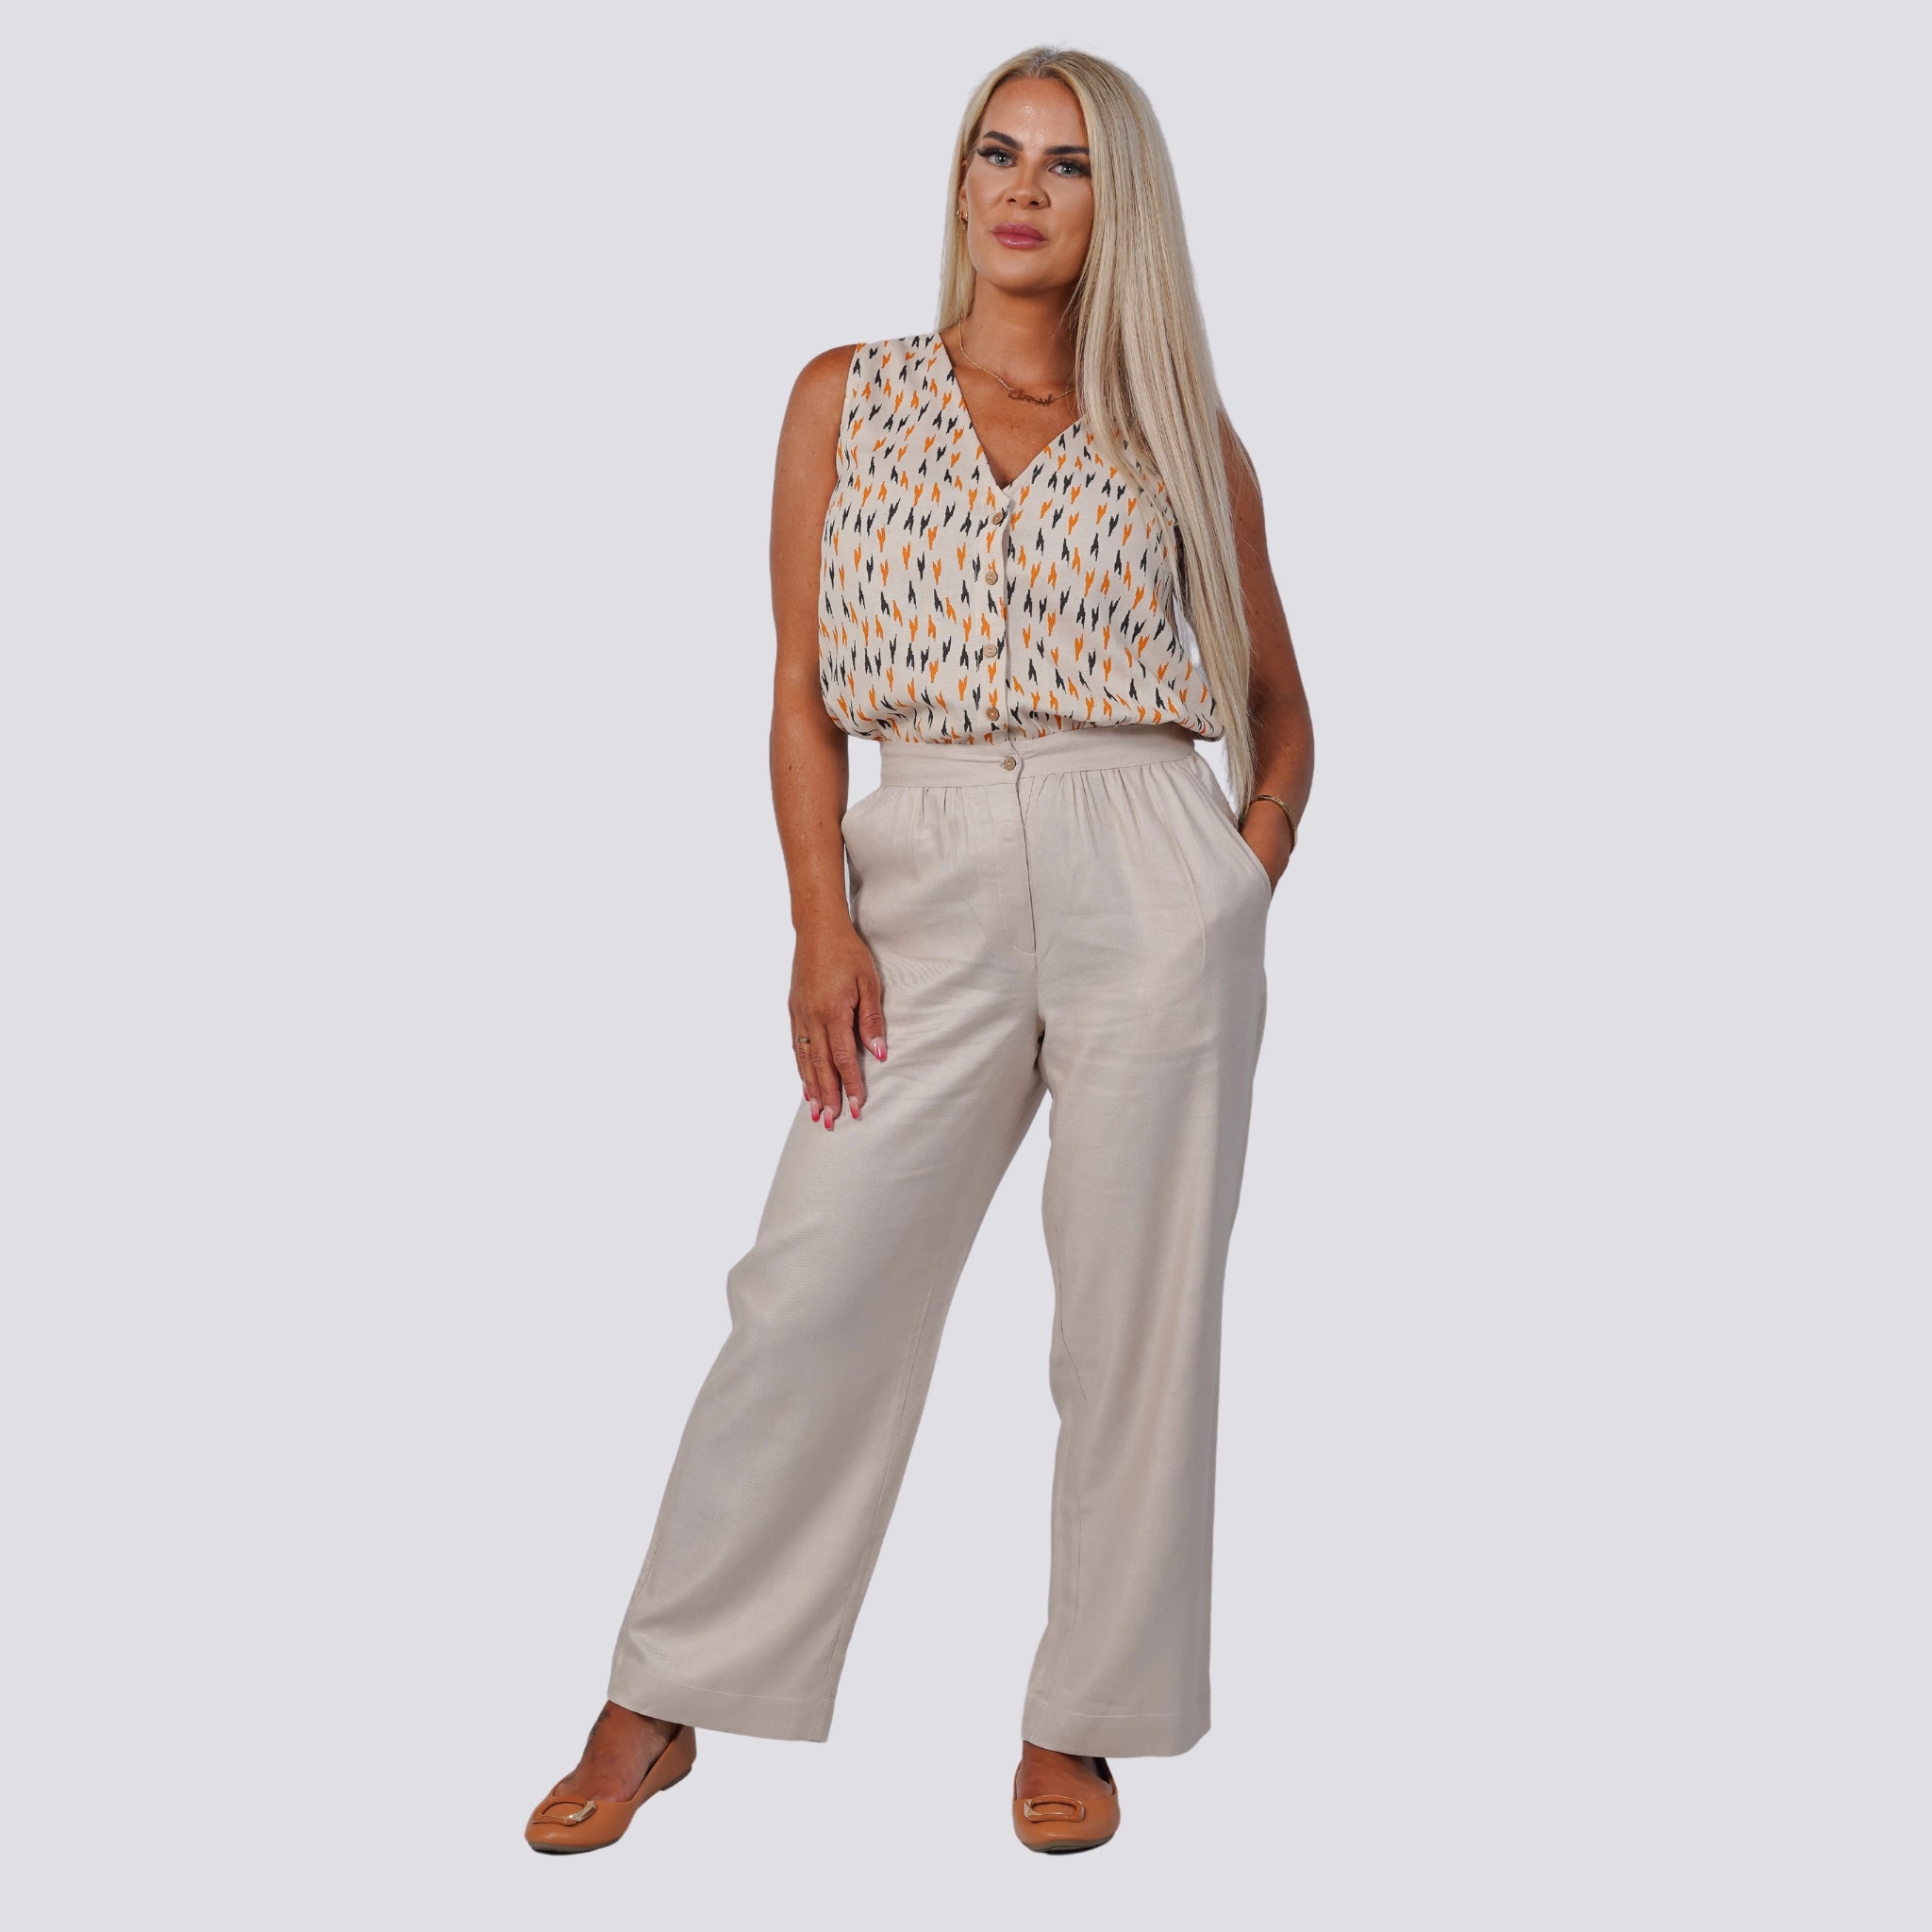 A woman with long blonde hair, wearing a Navy Nights Golden Palm Leaves Linen Shirt Dress by Karee, stands with both hands in her pockets against a plain light background, exemplifying the elegance of a sustainable wardrobe.